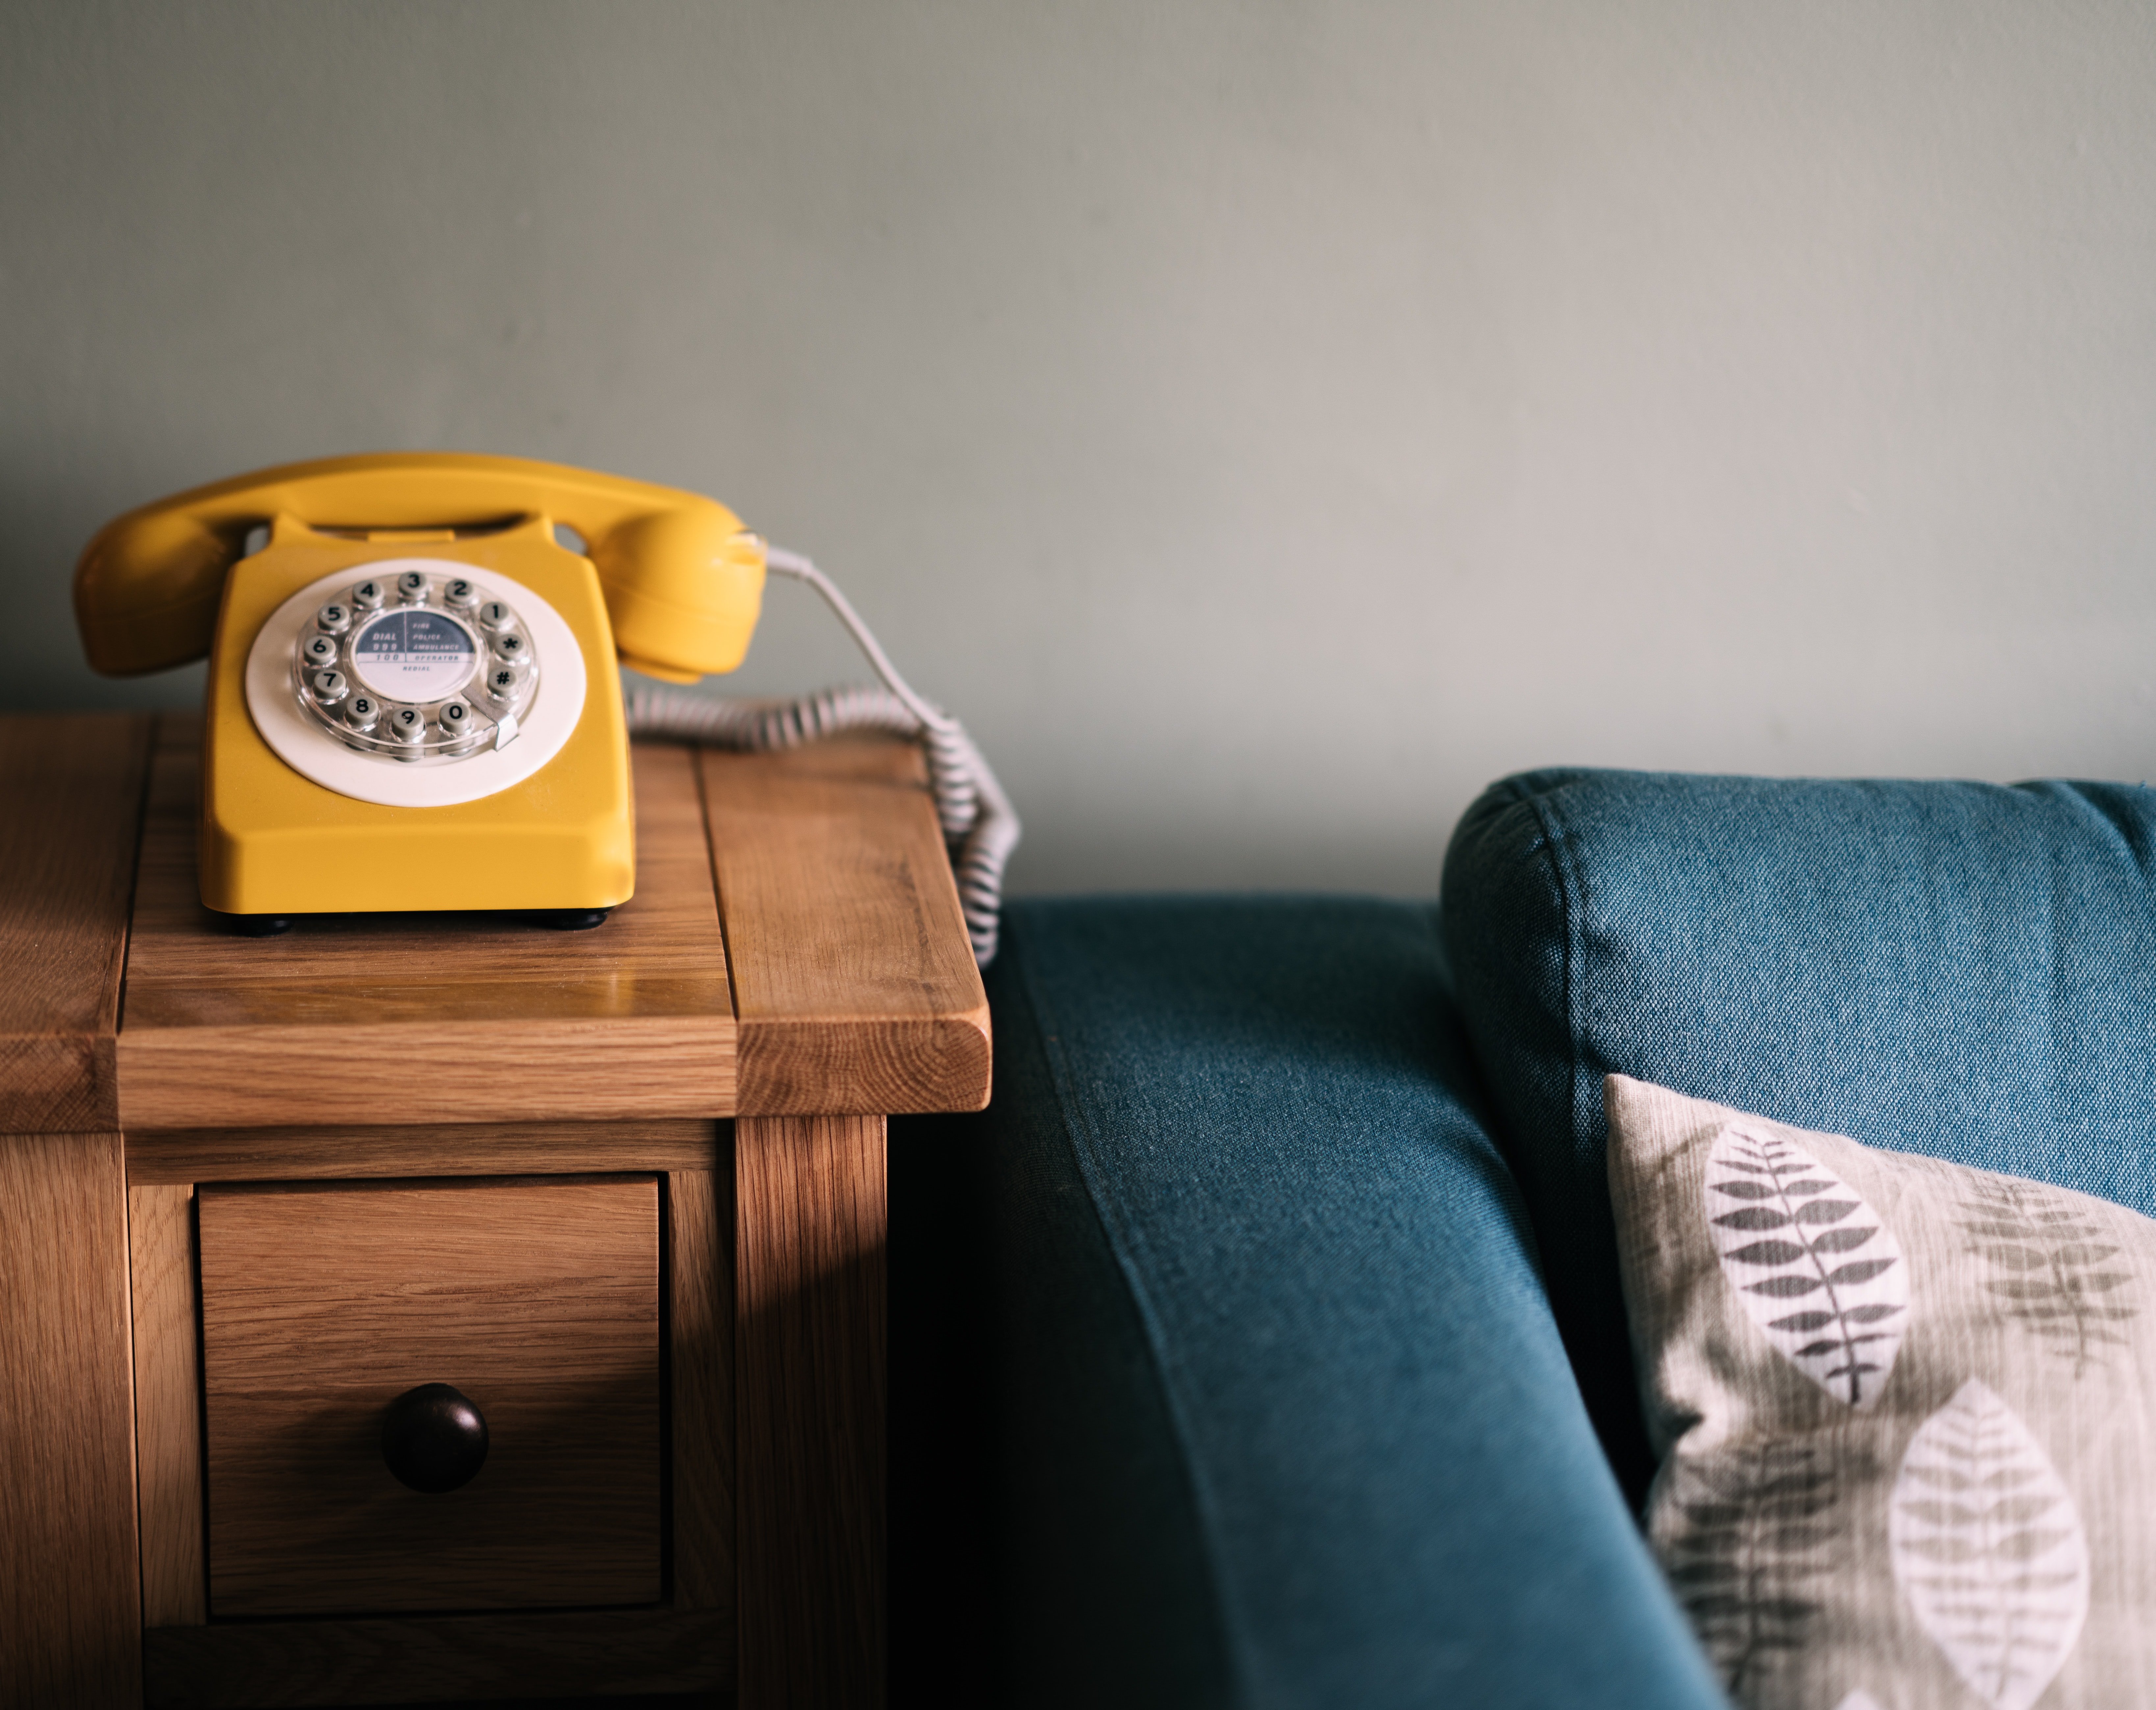 A yellow telephone on a wooden table beside a blue couch. | Source: Unplash